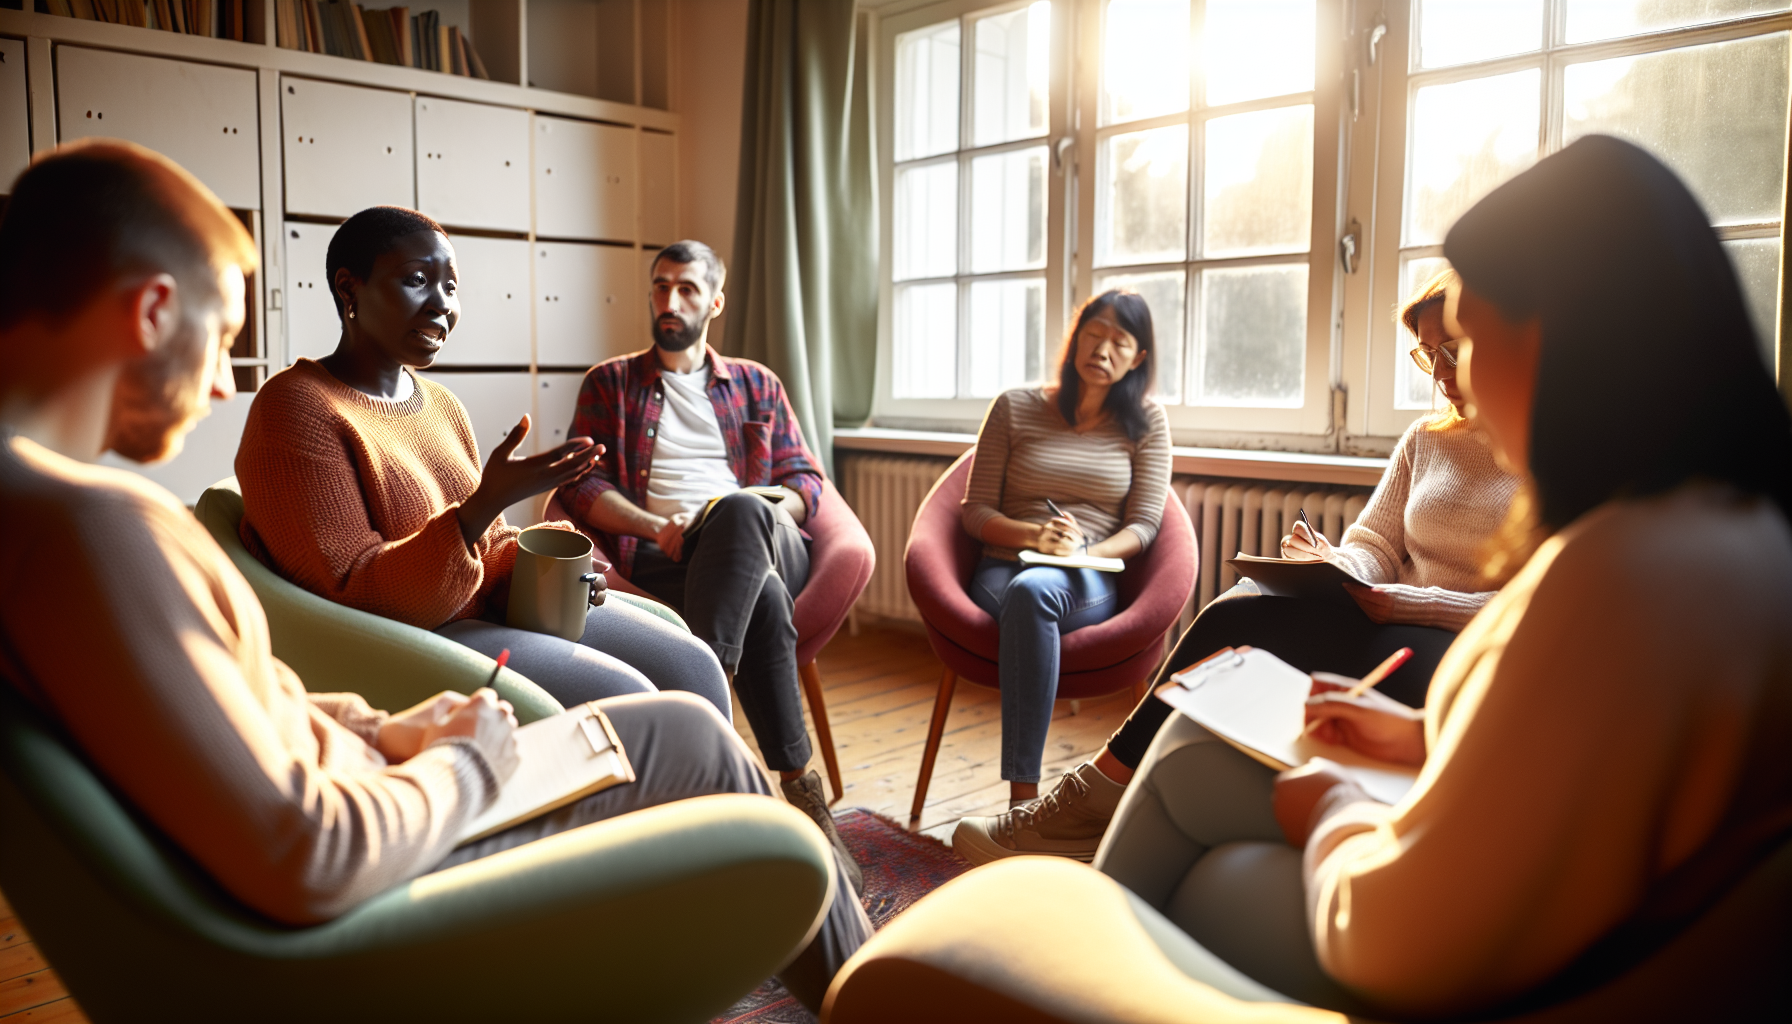 Group therapy session for alcohol use disorder